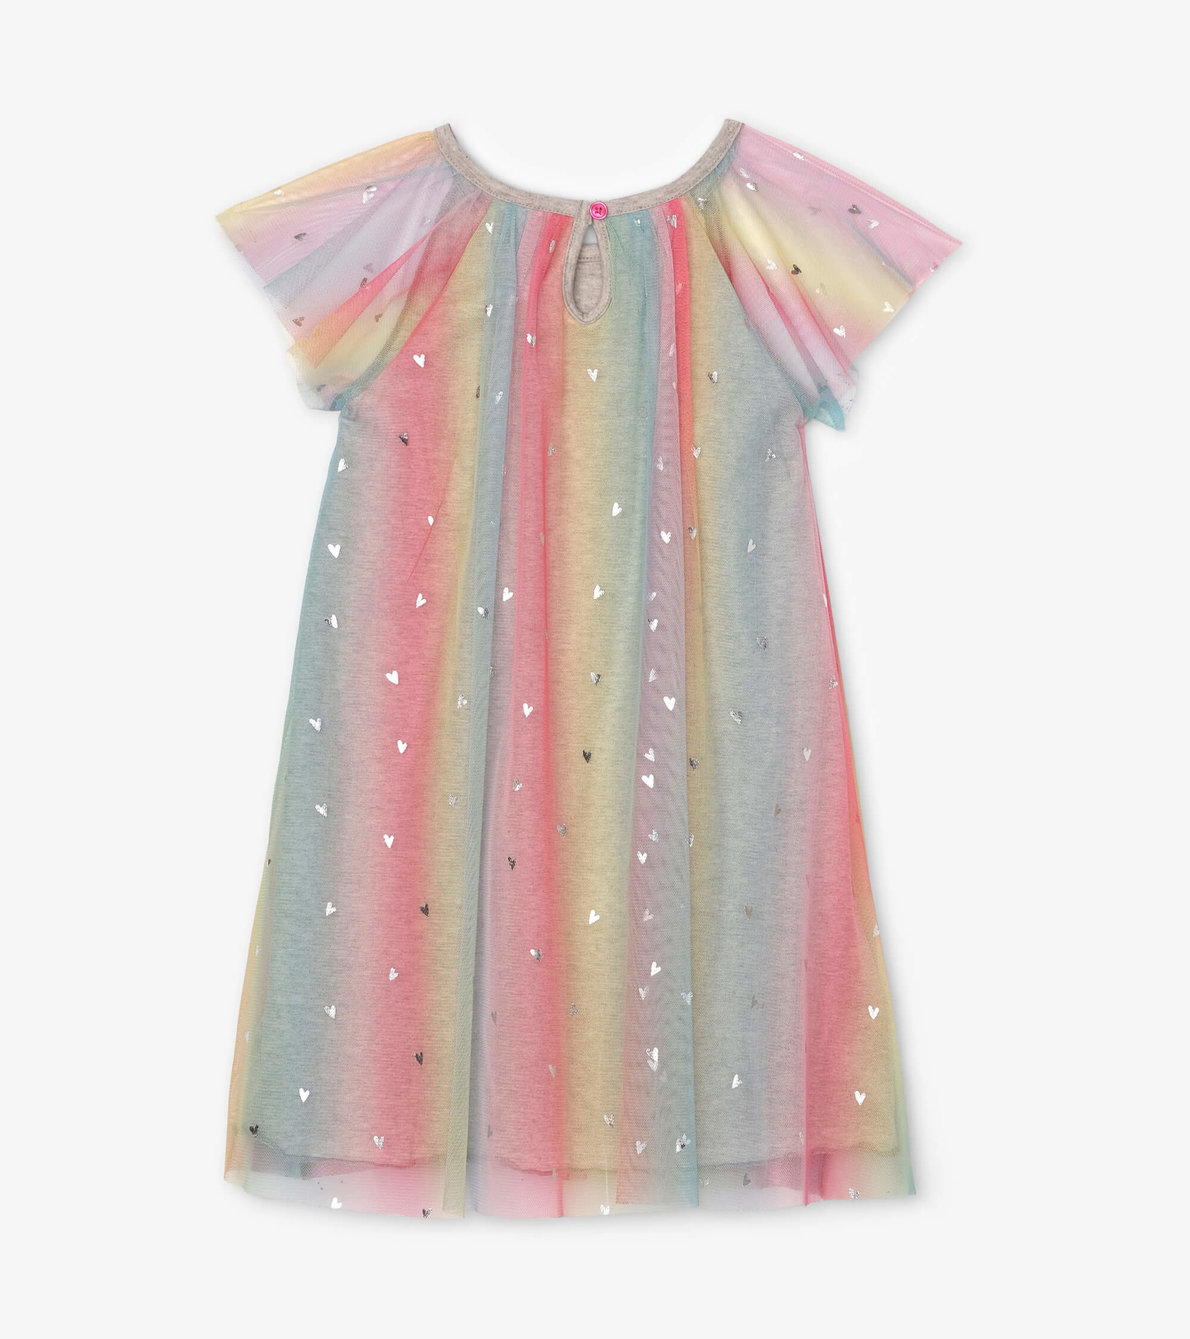 View larger image of Metallic Hearts Rainbow Tulle Dress